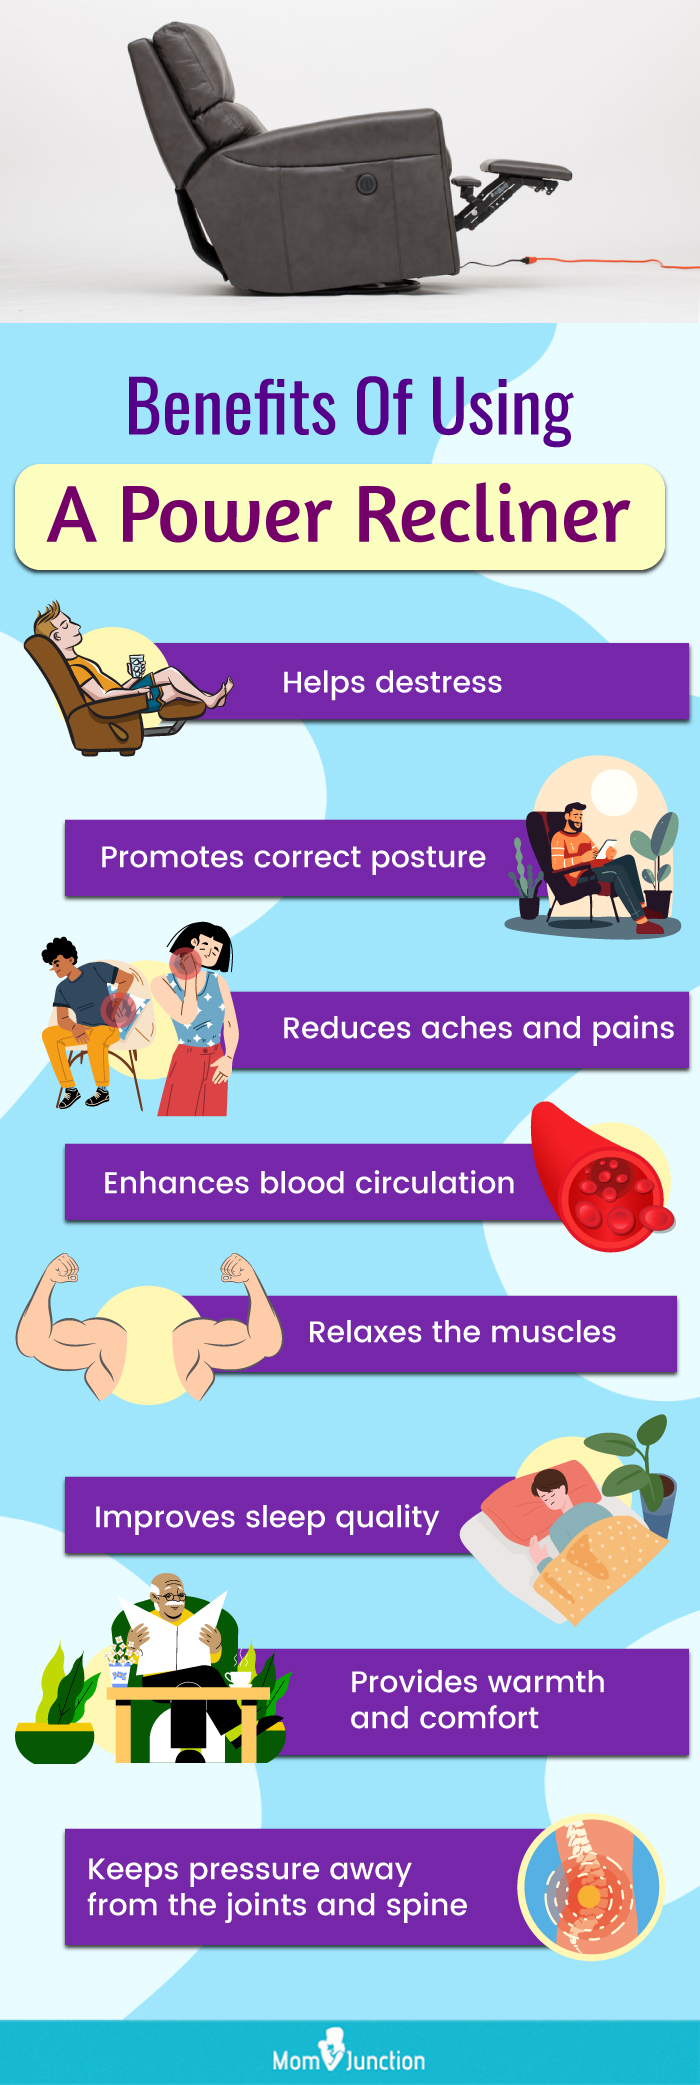 Benefits Of Using A Power Recliner (infographic)